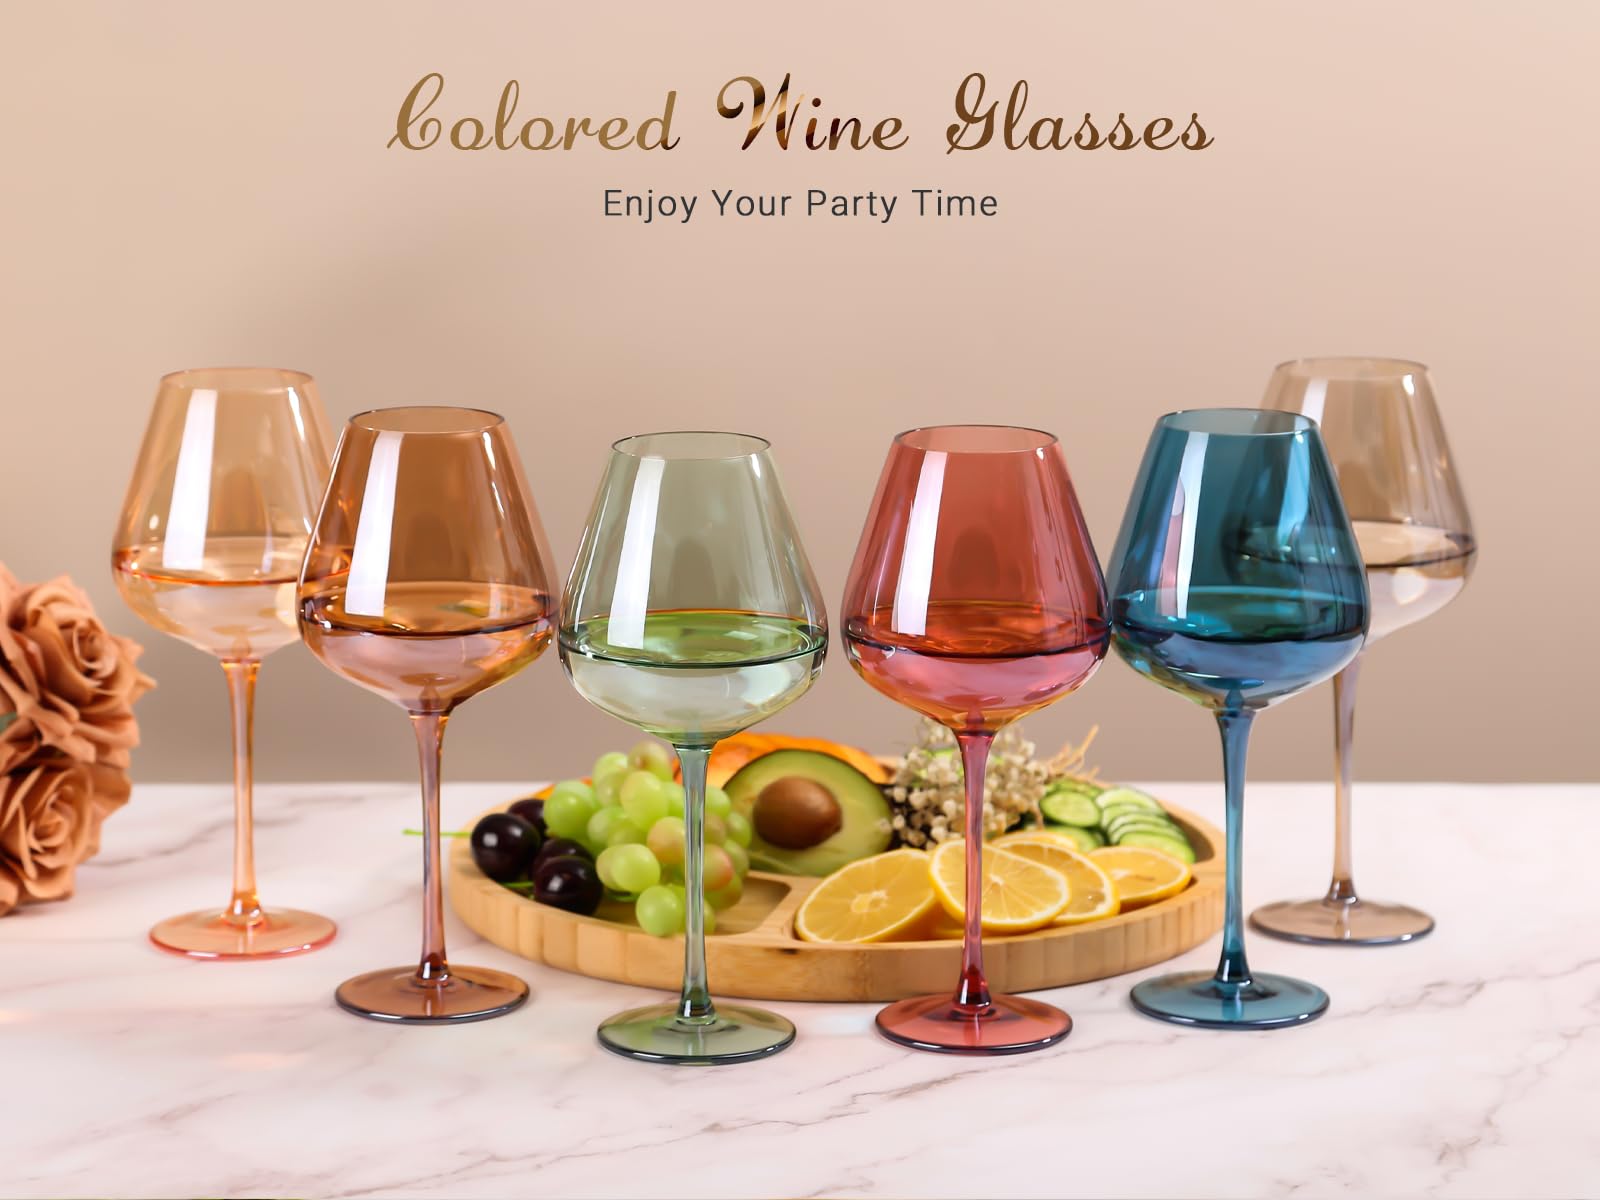 Physkoa Colored Wine Glasses Set 6-18oz HandBlown Multicolor Wine Glasses With Long Stem&Large Bowl,Stemmed Colorful Stemware,Mothers Day Gifts